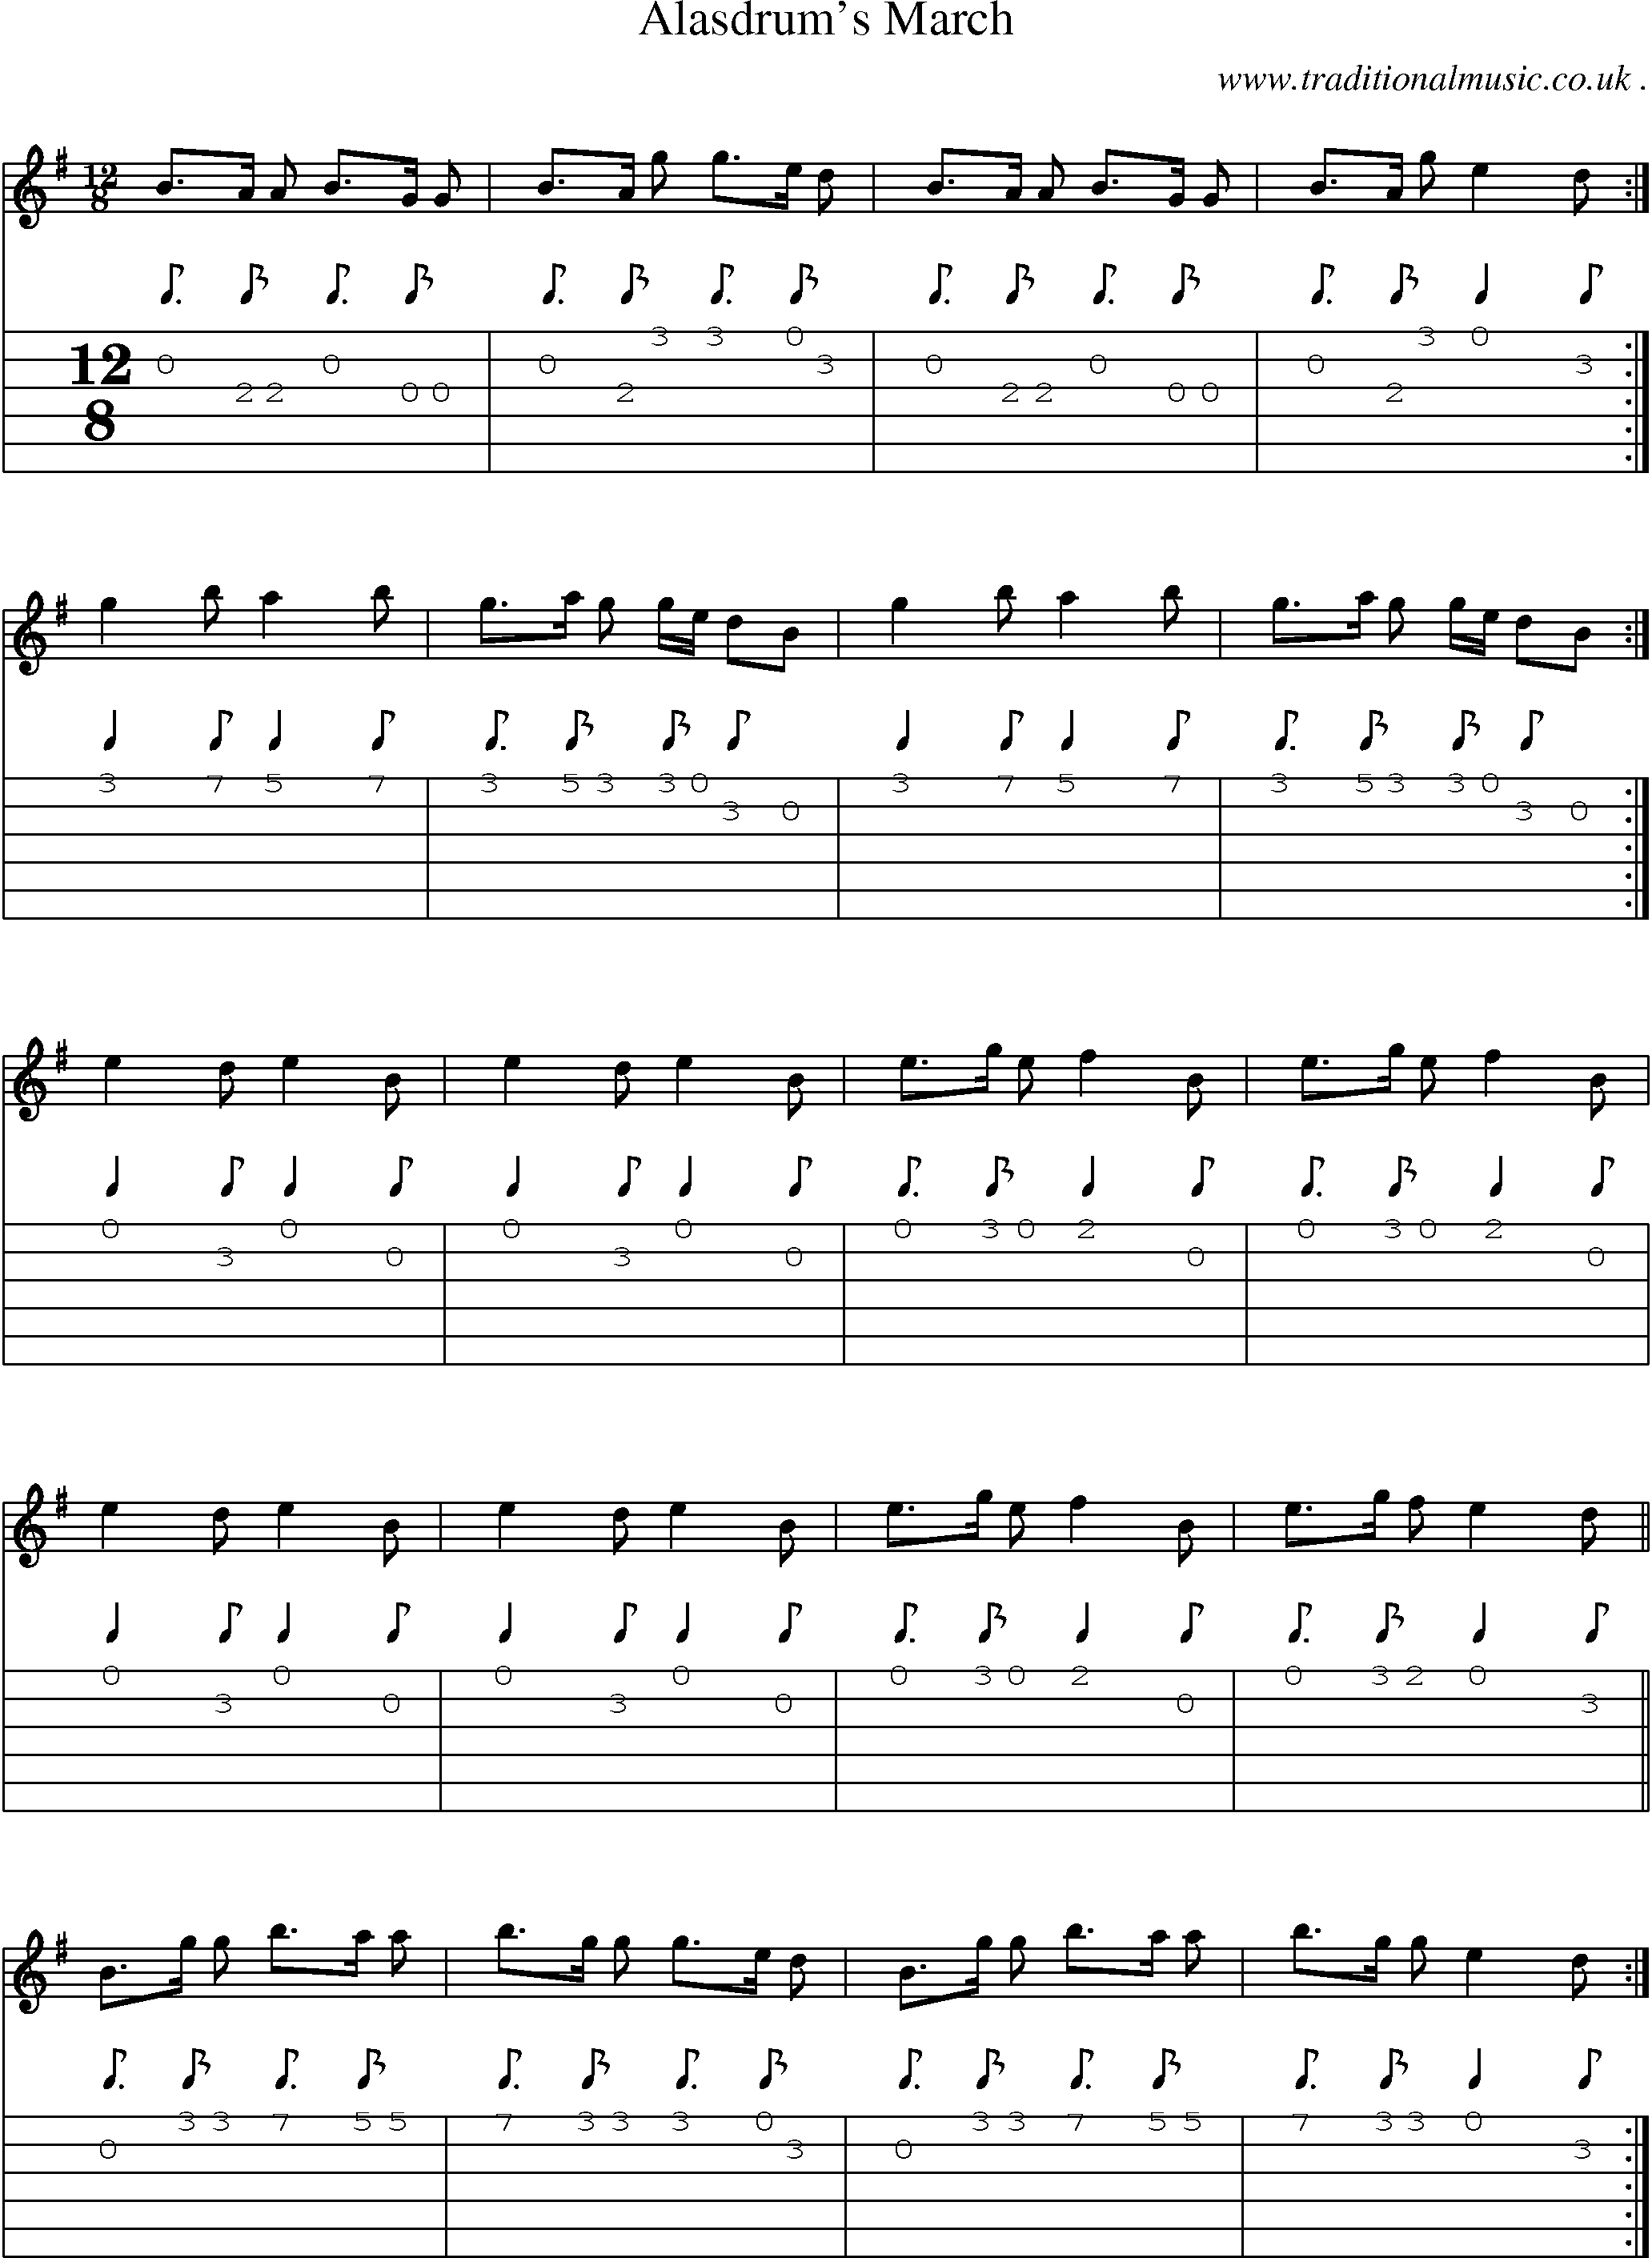 Sheet-Music and Guitar Tabs for Alasdrums March